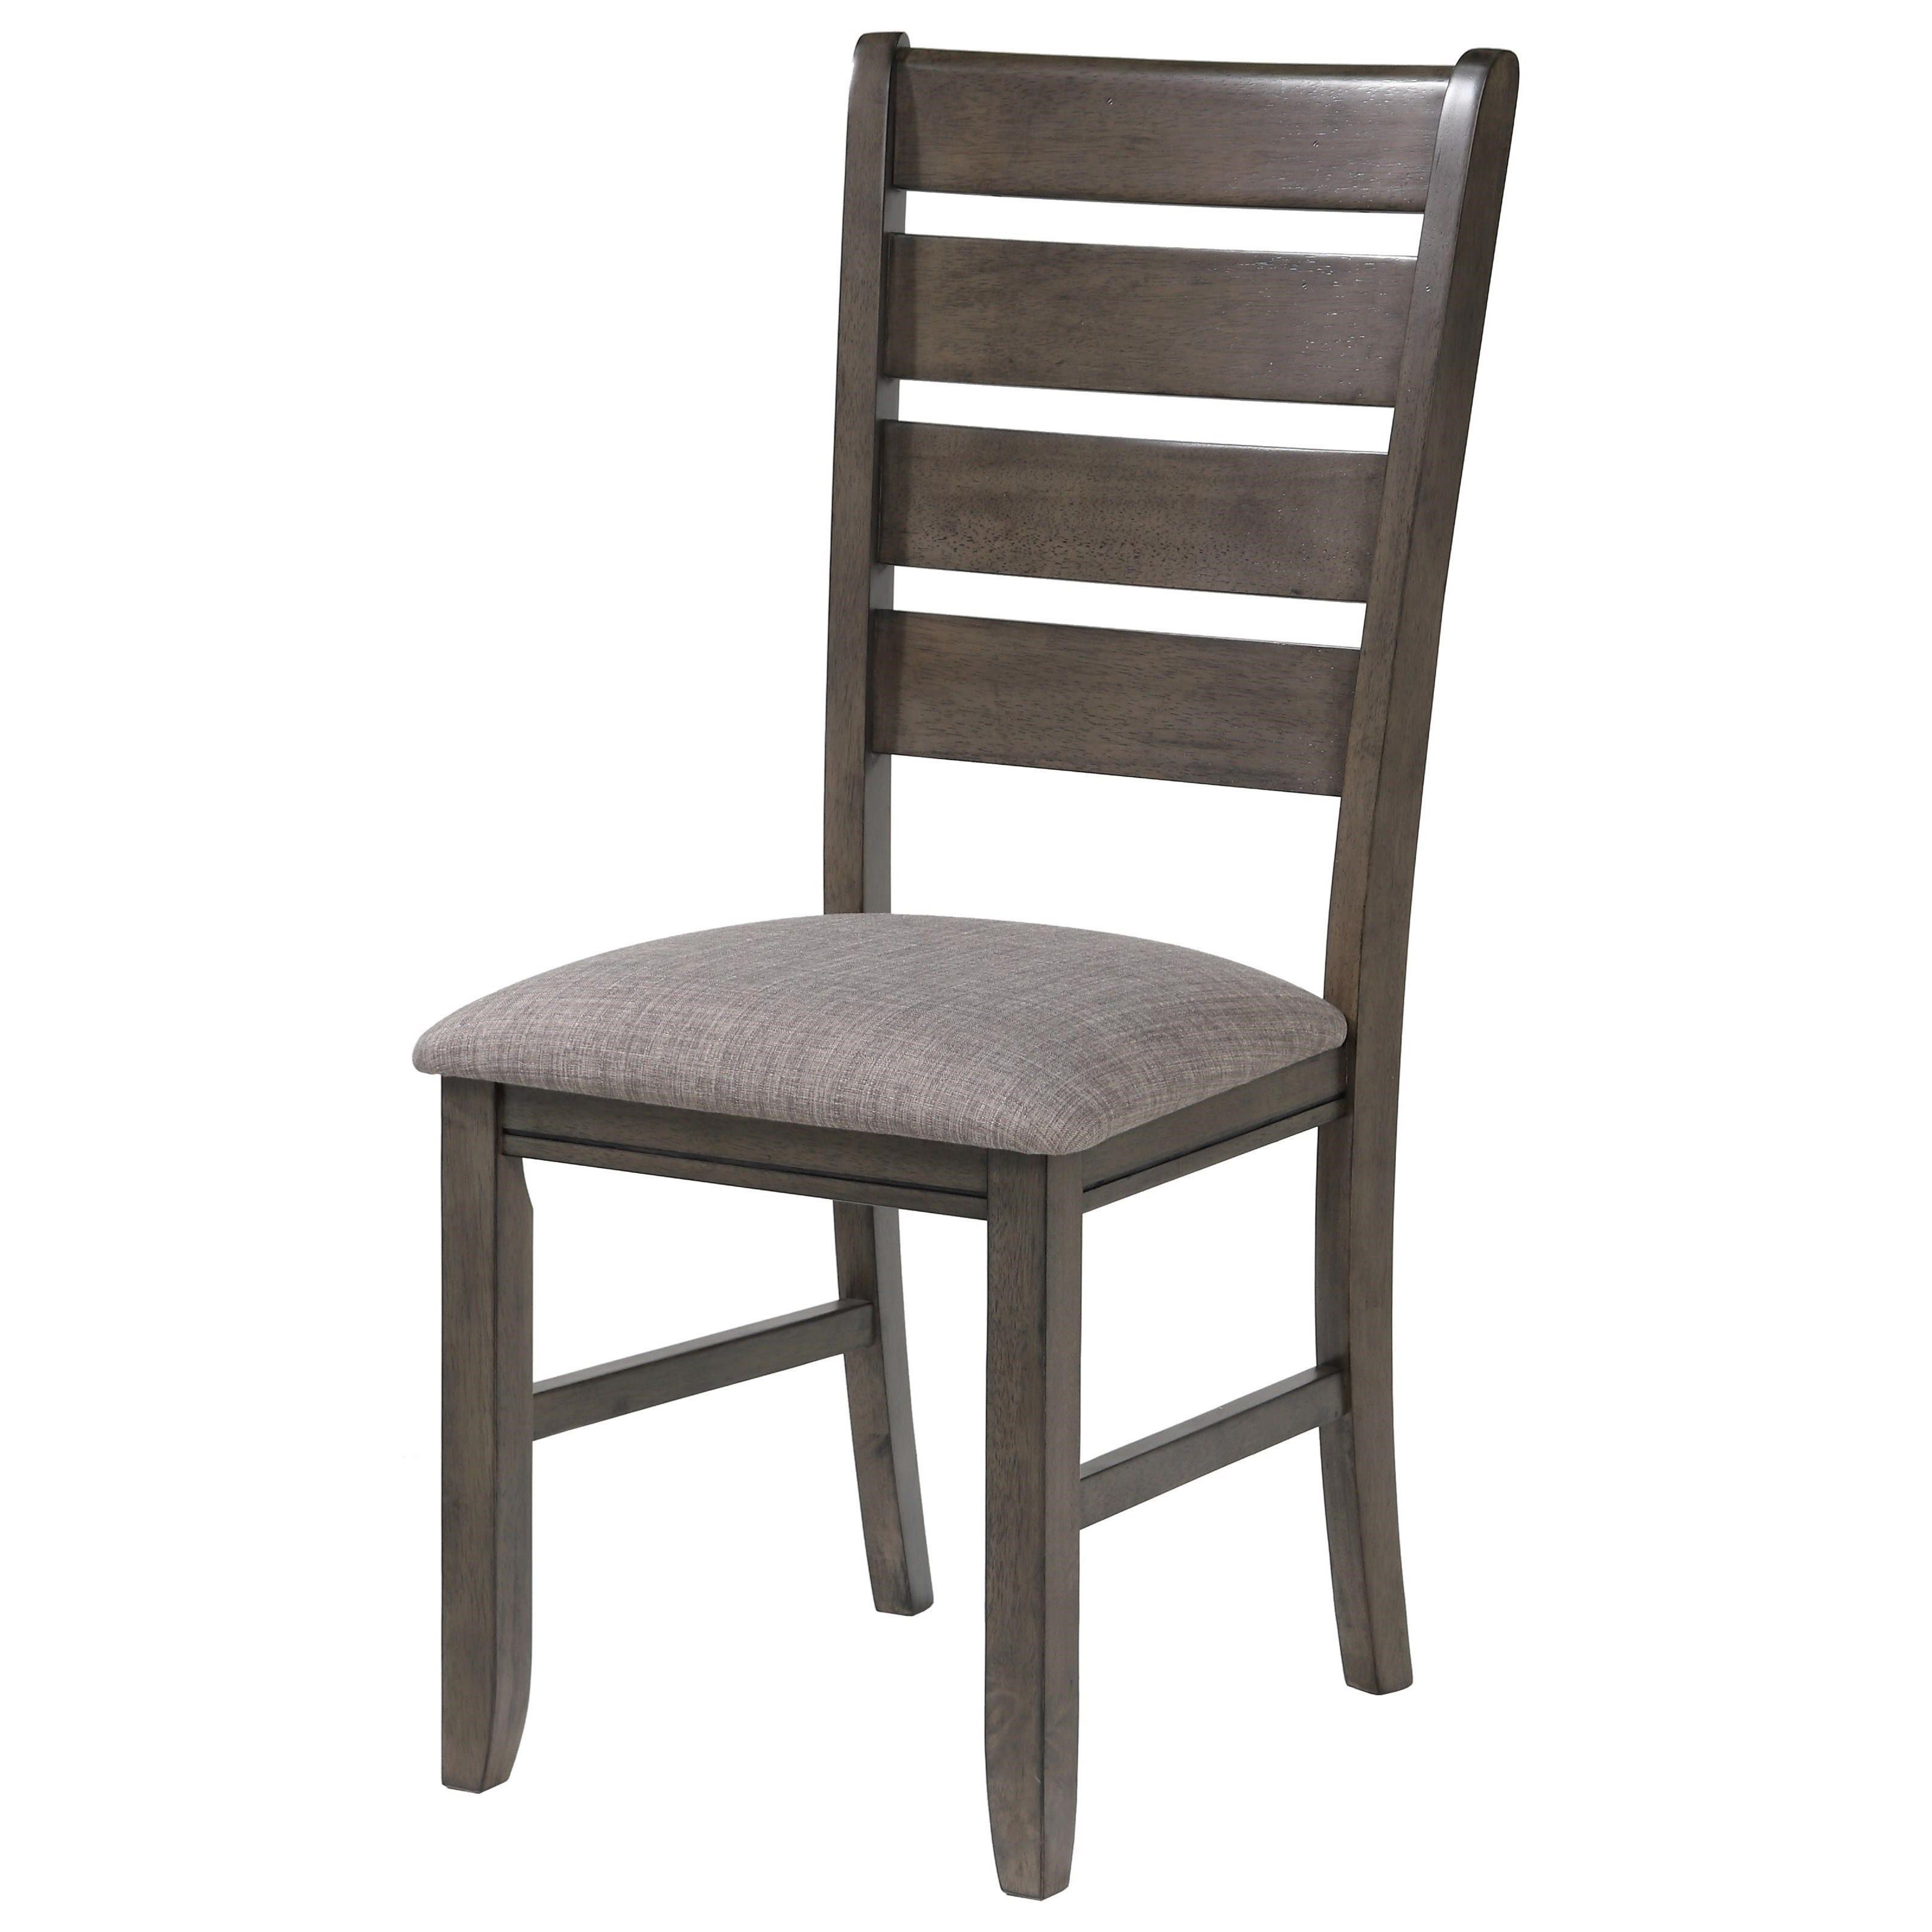 Most Up To Date Bardstown Side Chairs Throughout Crown Mark Bardstown 2152gy S Side Chair With Upholstered Seat (View 7 of 20)